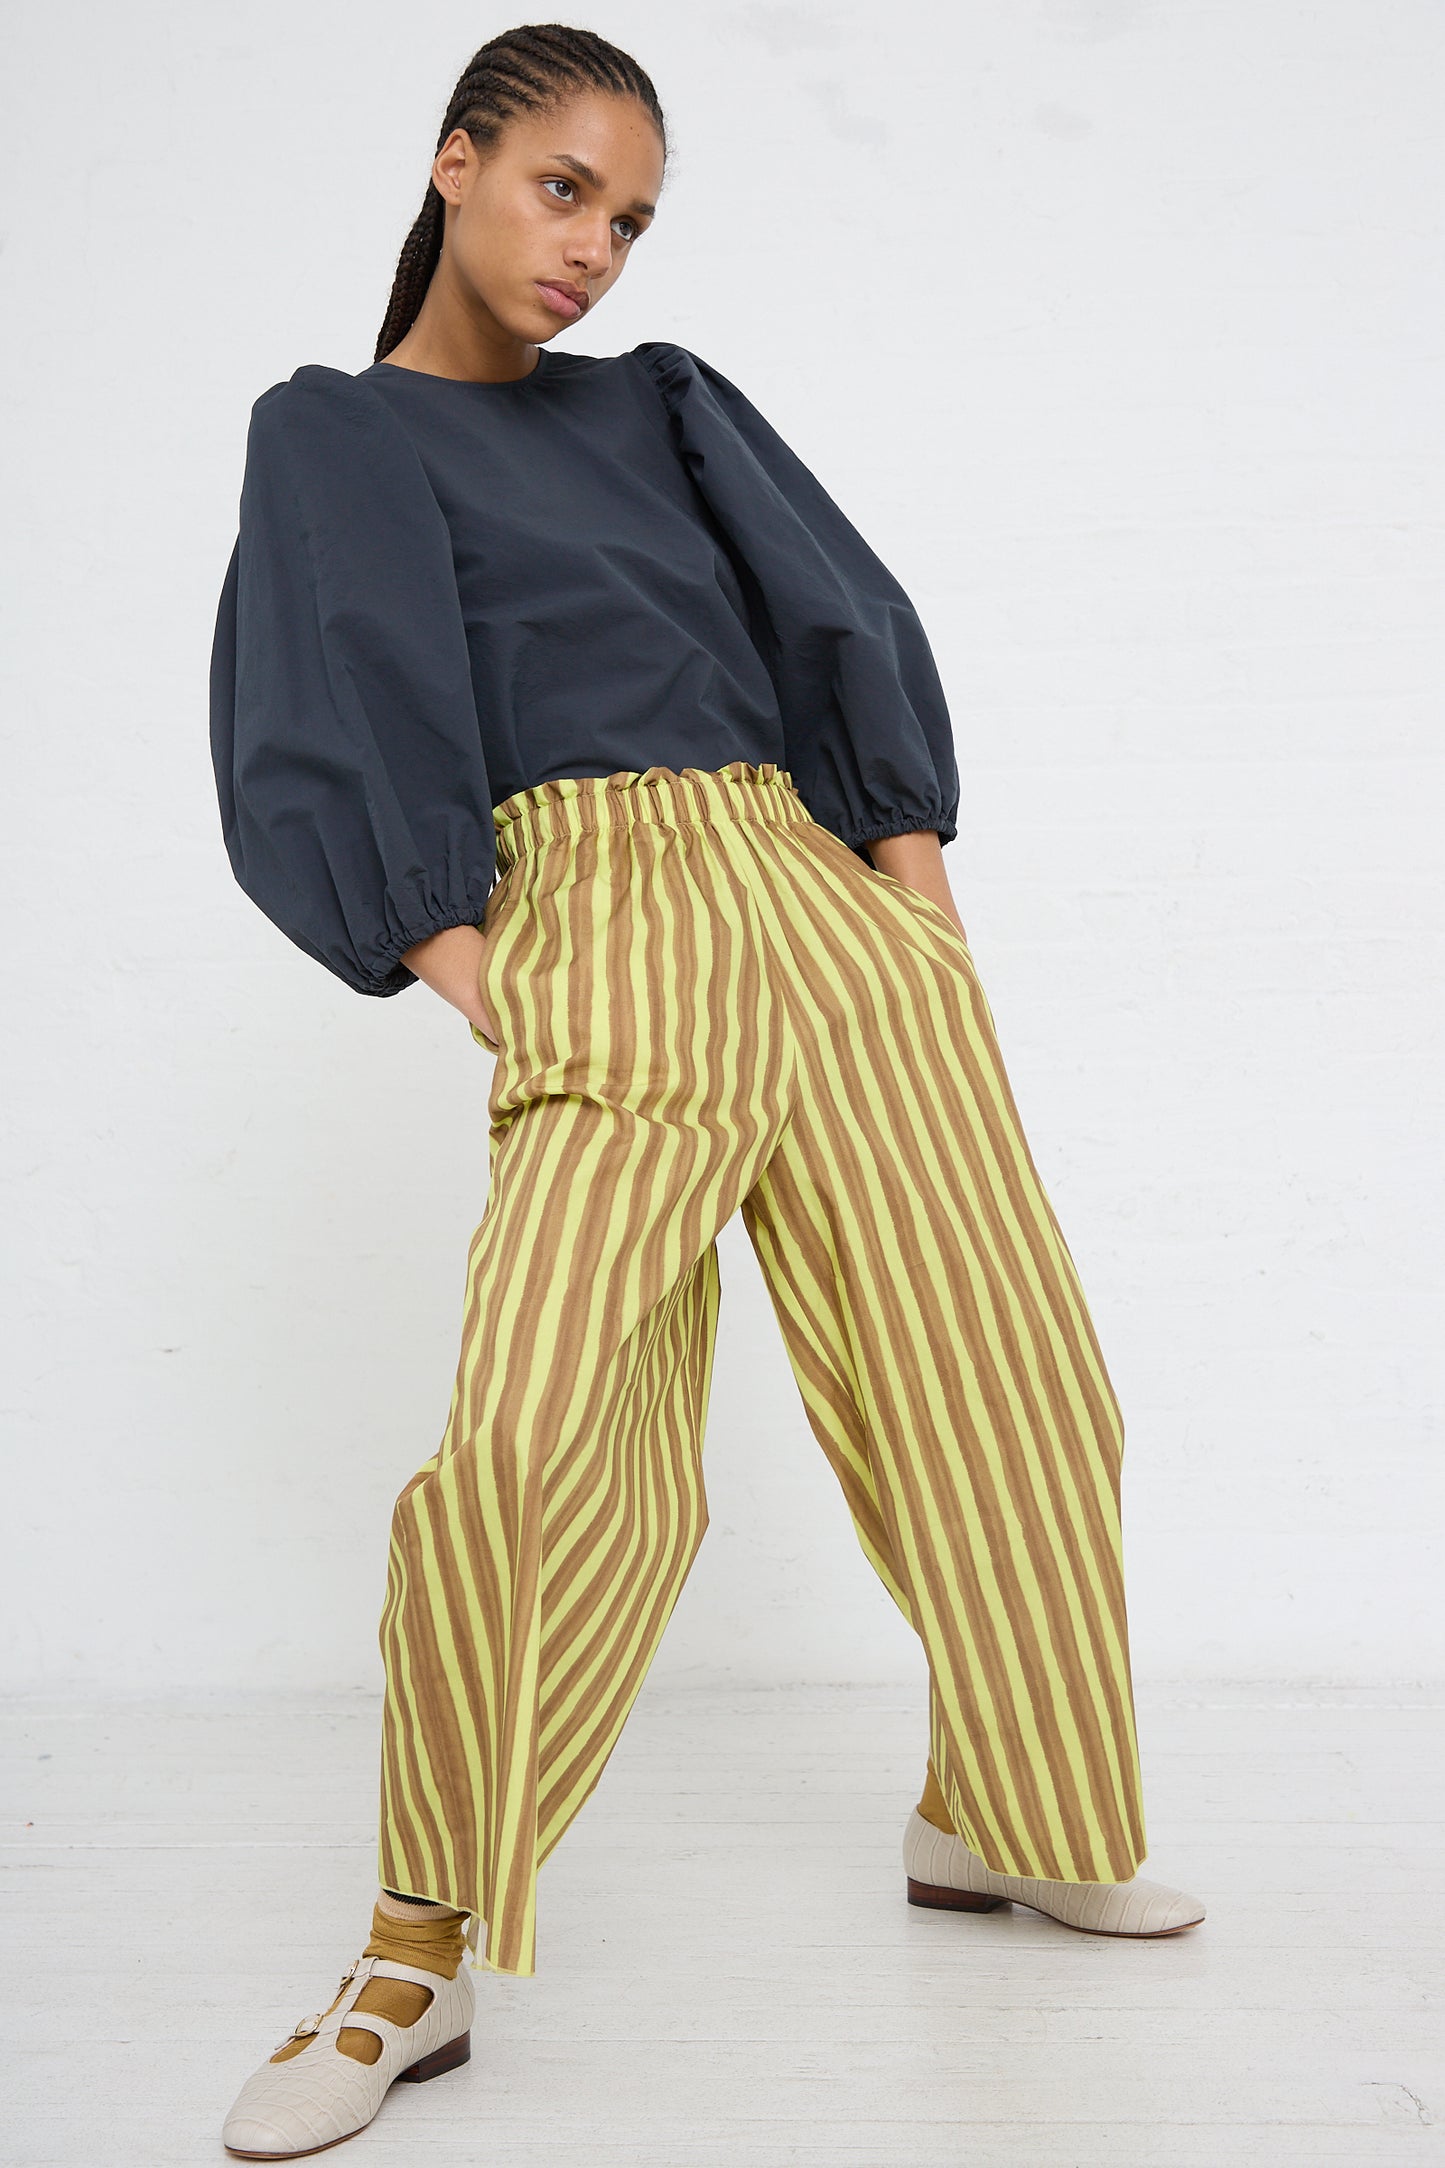 Woman posing in a dark blouse and AVN Easy Pant in Brown and Yellow Stripes.